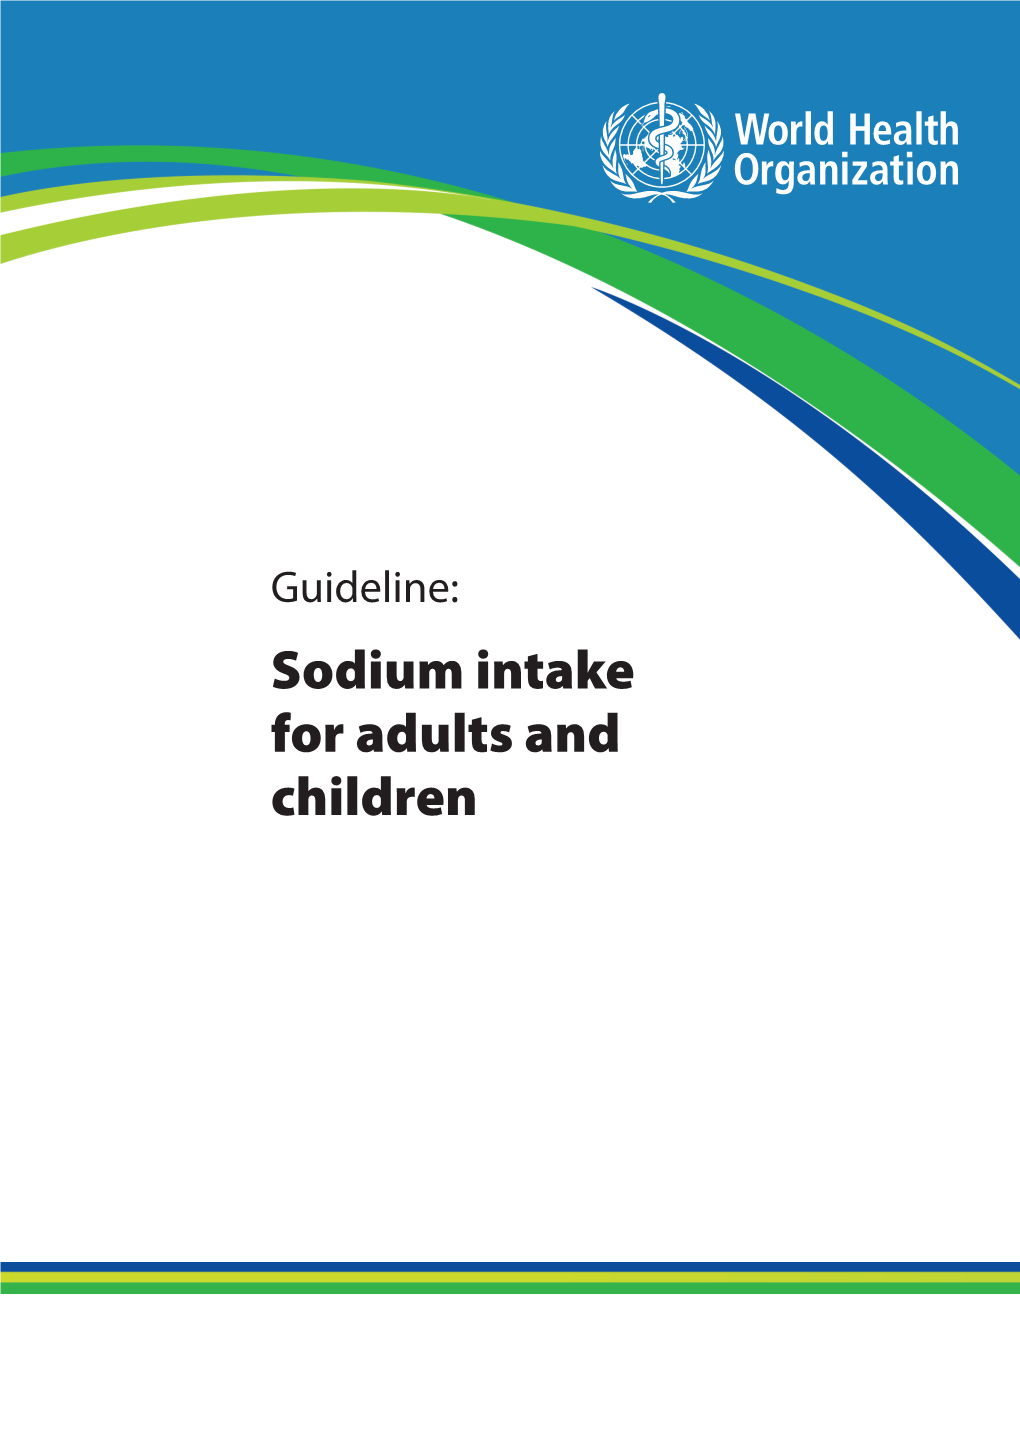 Guideline: Sodium Intake for Adults and Children